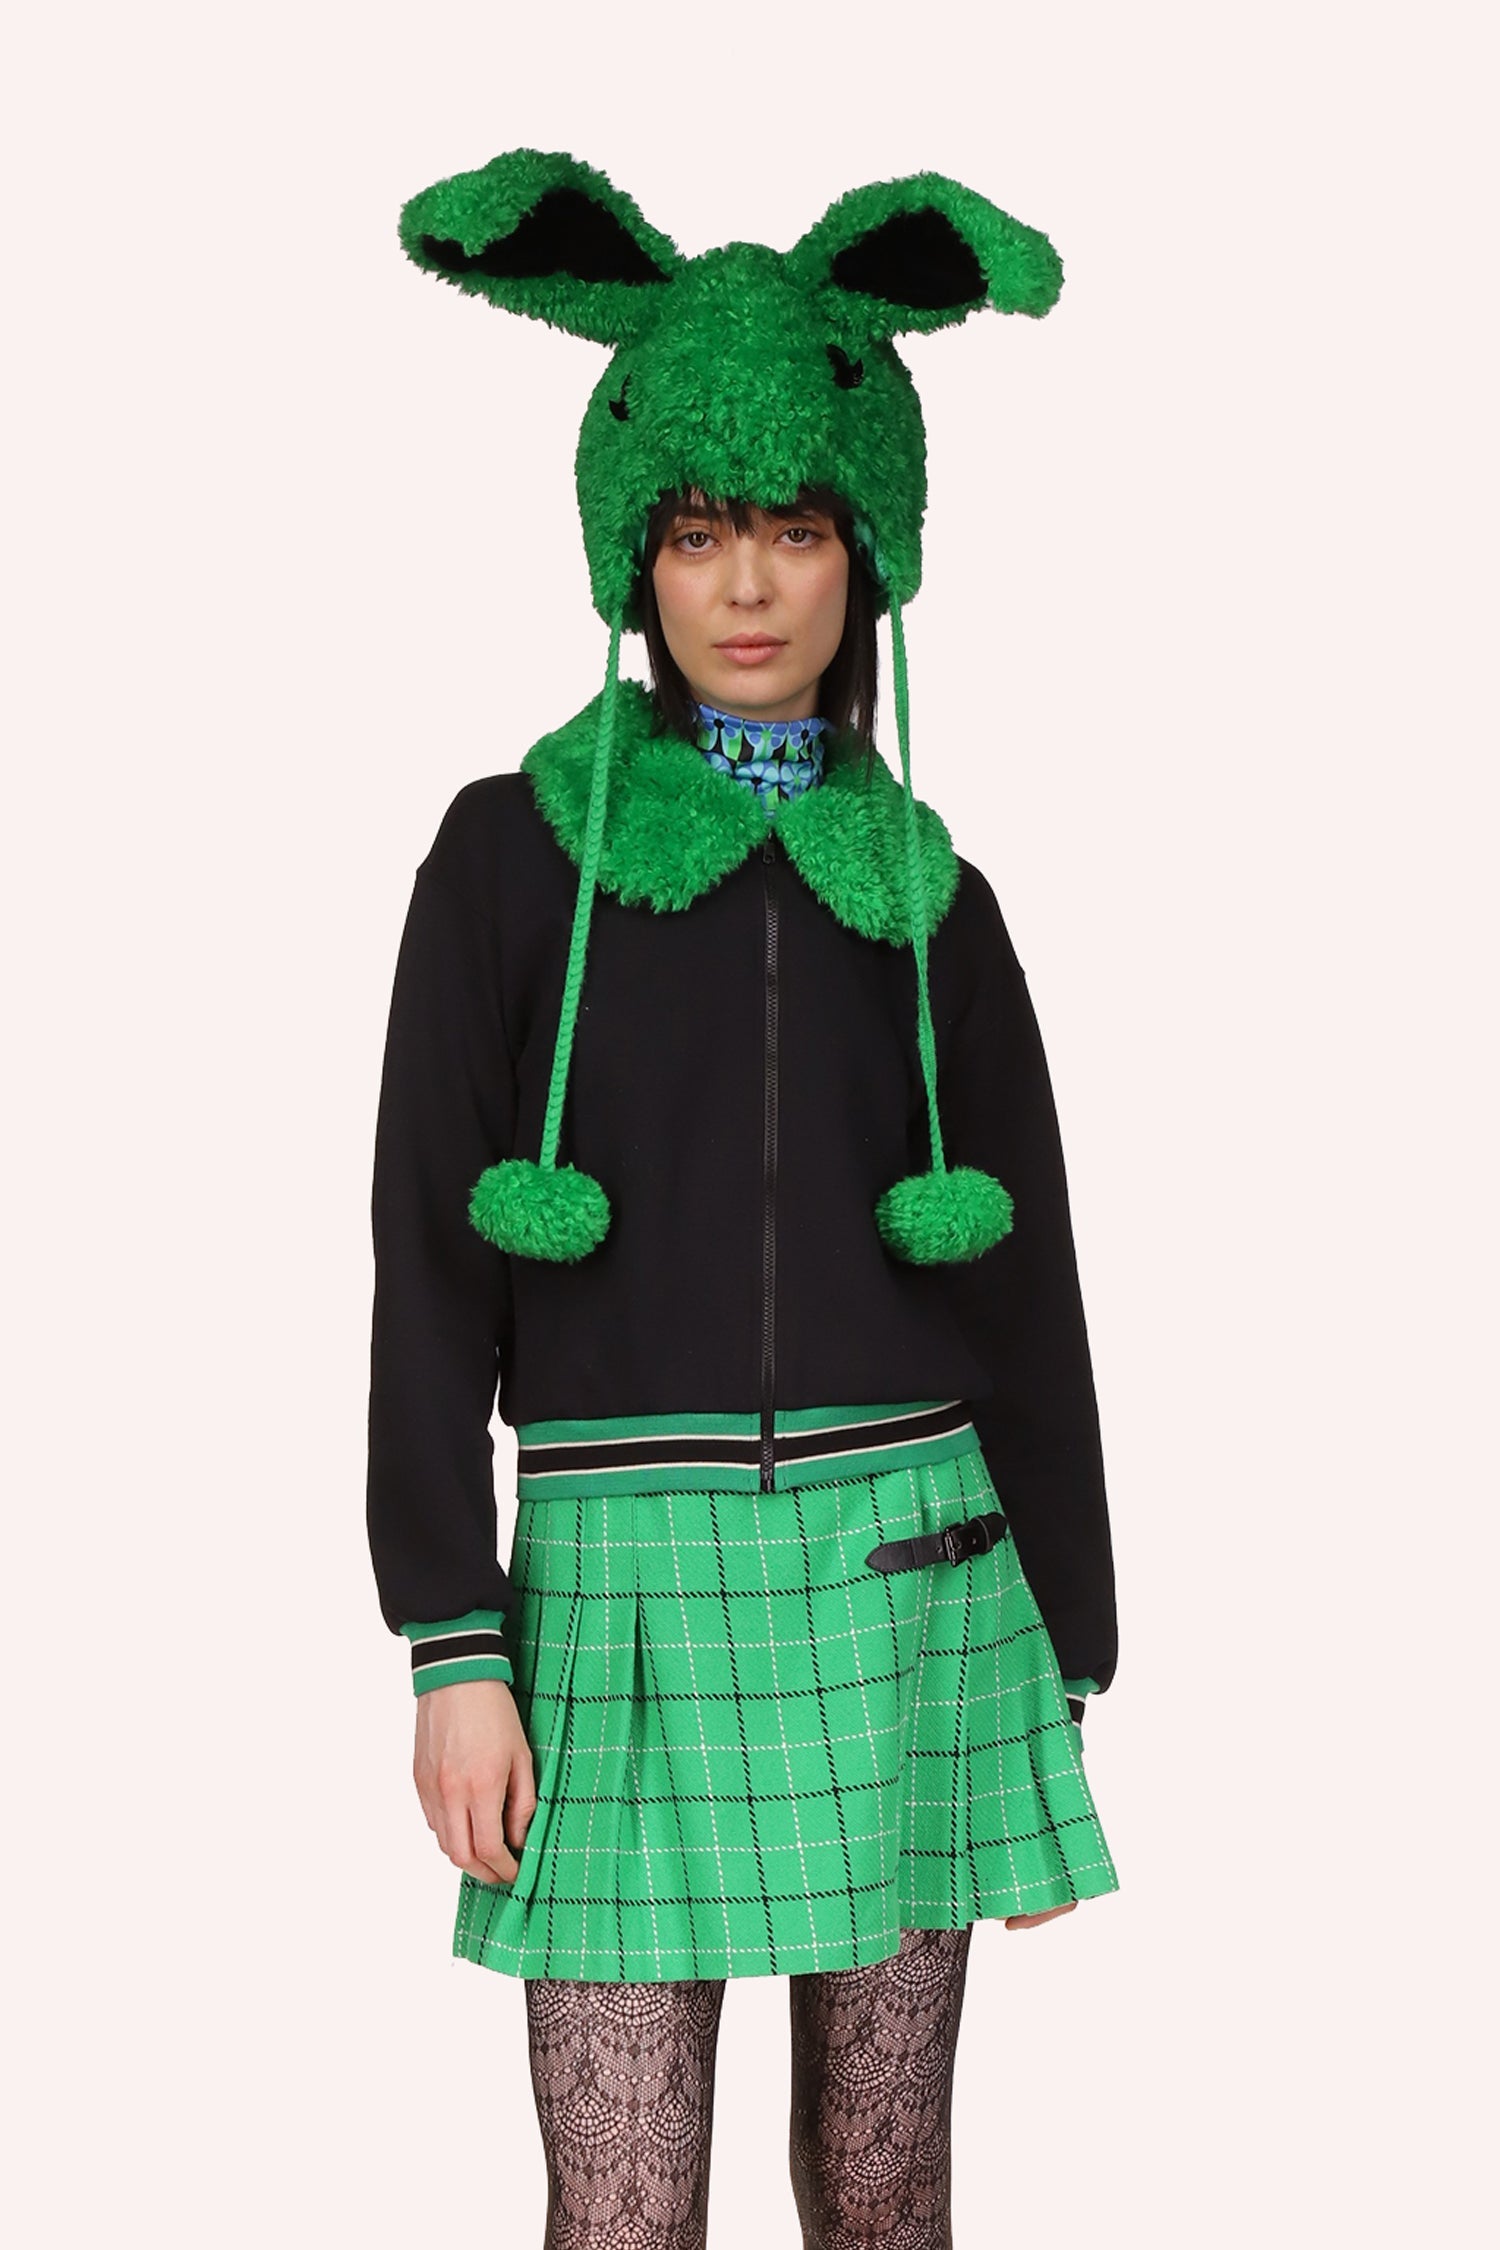 Anna Sui Plush Sweatshirt, large collar Irish green, front zipper, long sleeves with green ornament at the hand